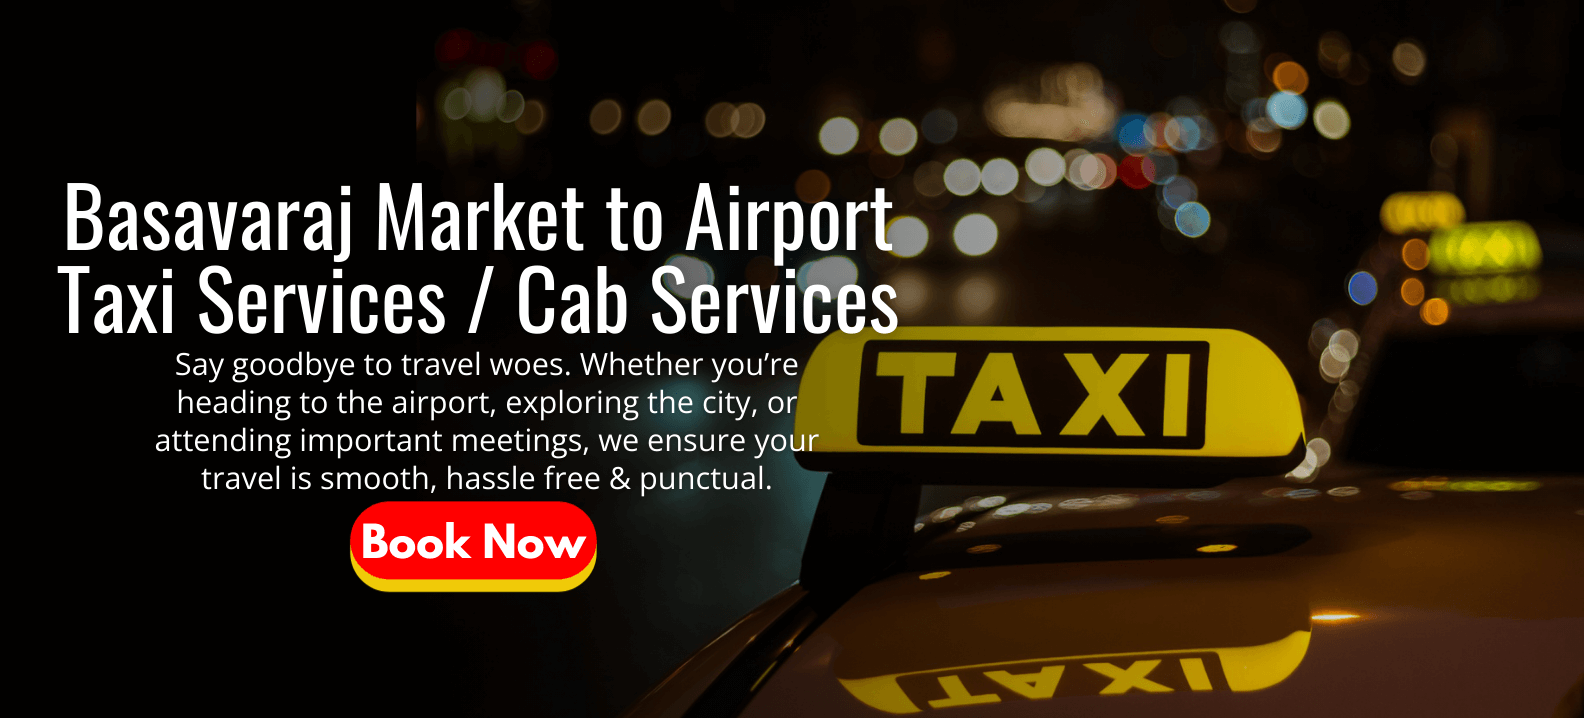 Basavaraja Market to Airport Taxi Services _ Cab Services